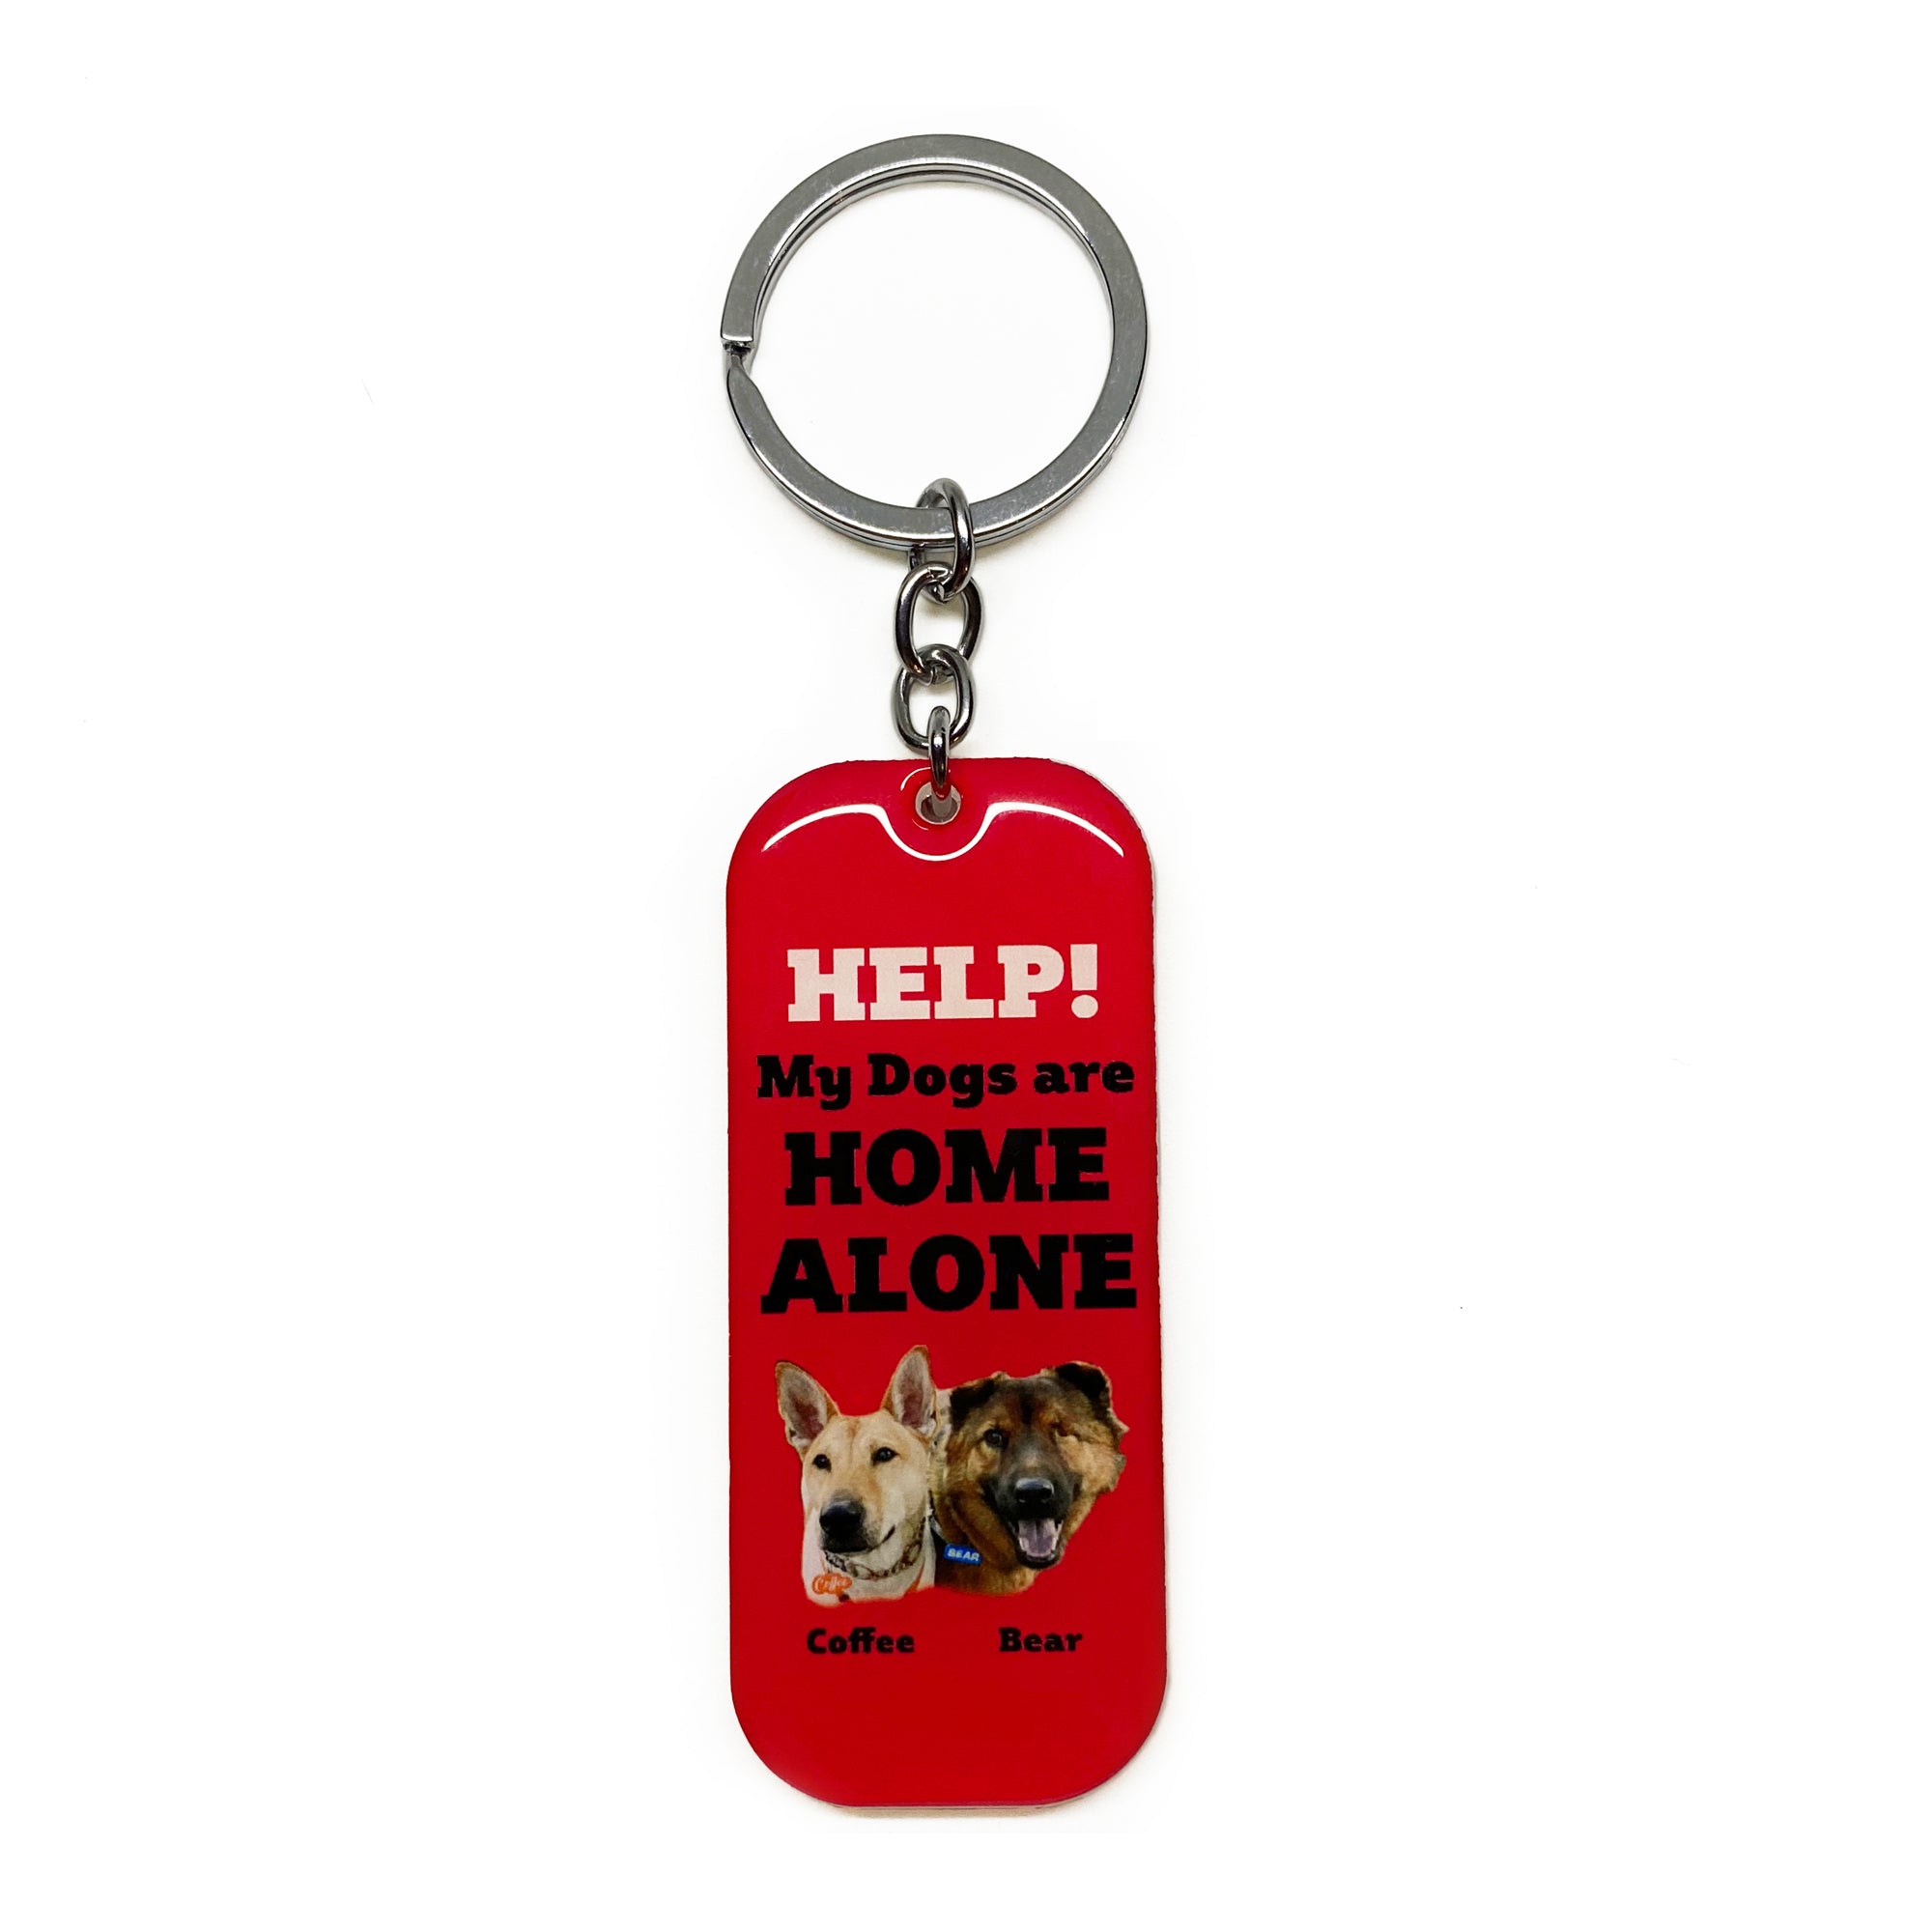 My Pet Is Home Alone Keychain Long Rectangular - 2x Tags Dog Name Tags by Bashtags